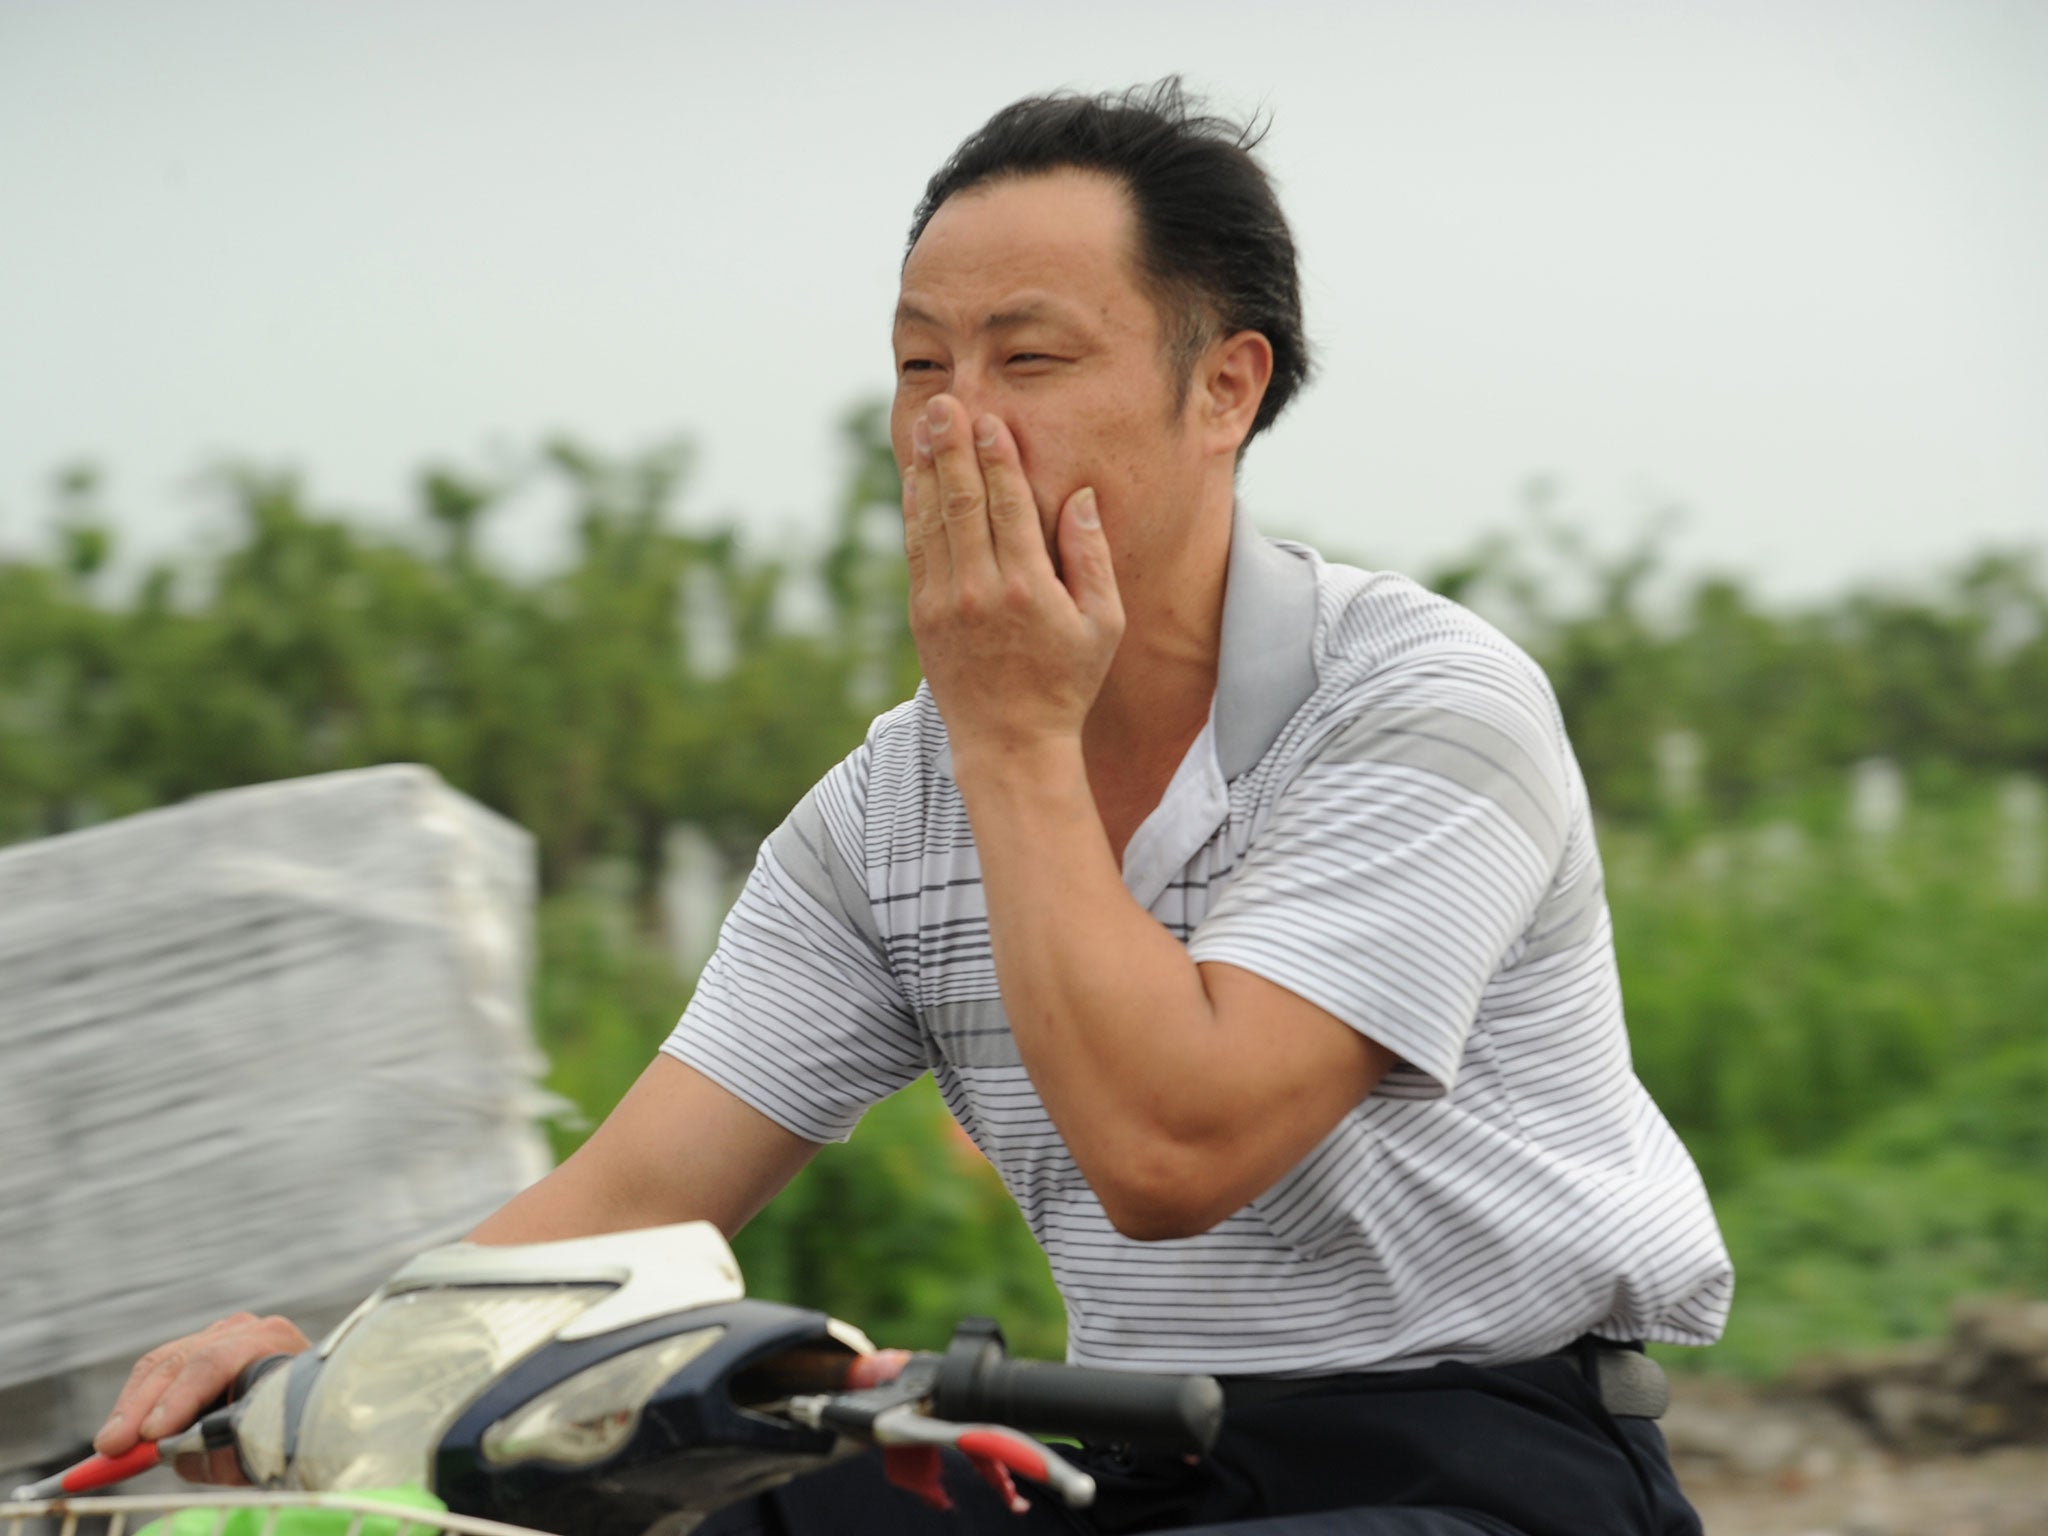 A man, unrelated to the study, on his motorcycle covers his nose against a bad smell